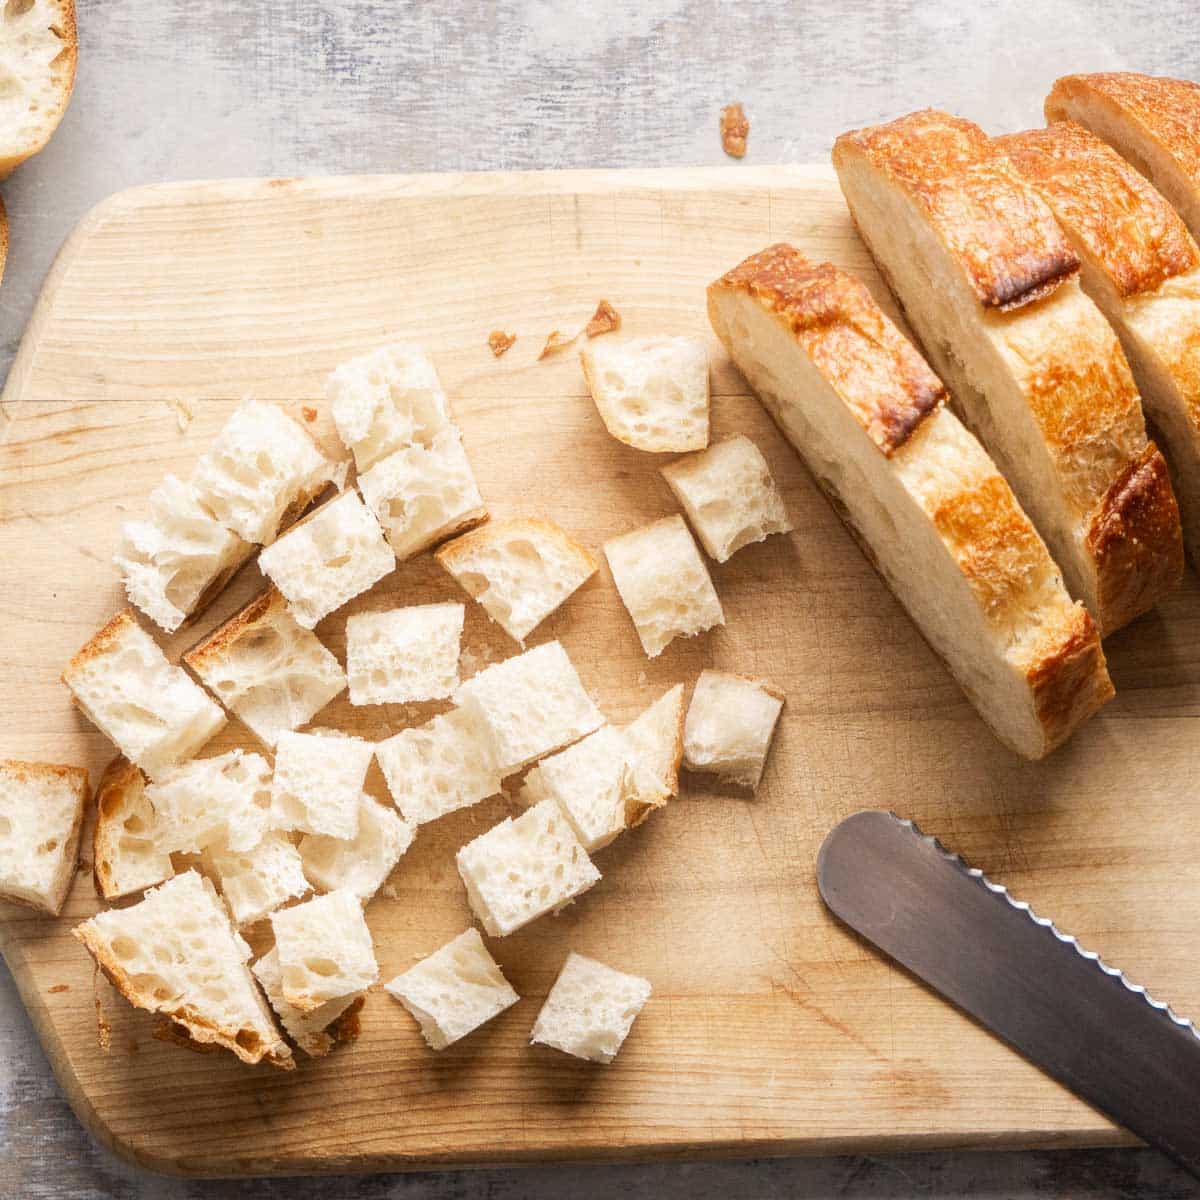 sliced bread and bread cubes on wood cutting board with serrated bread knife